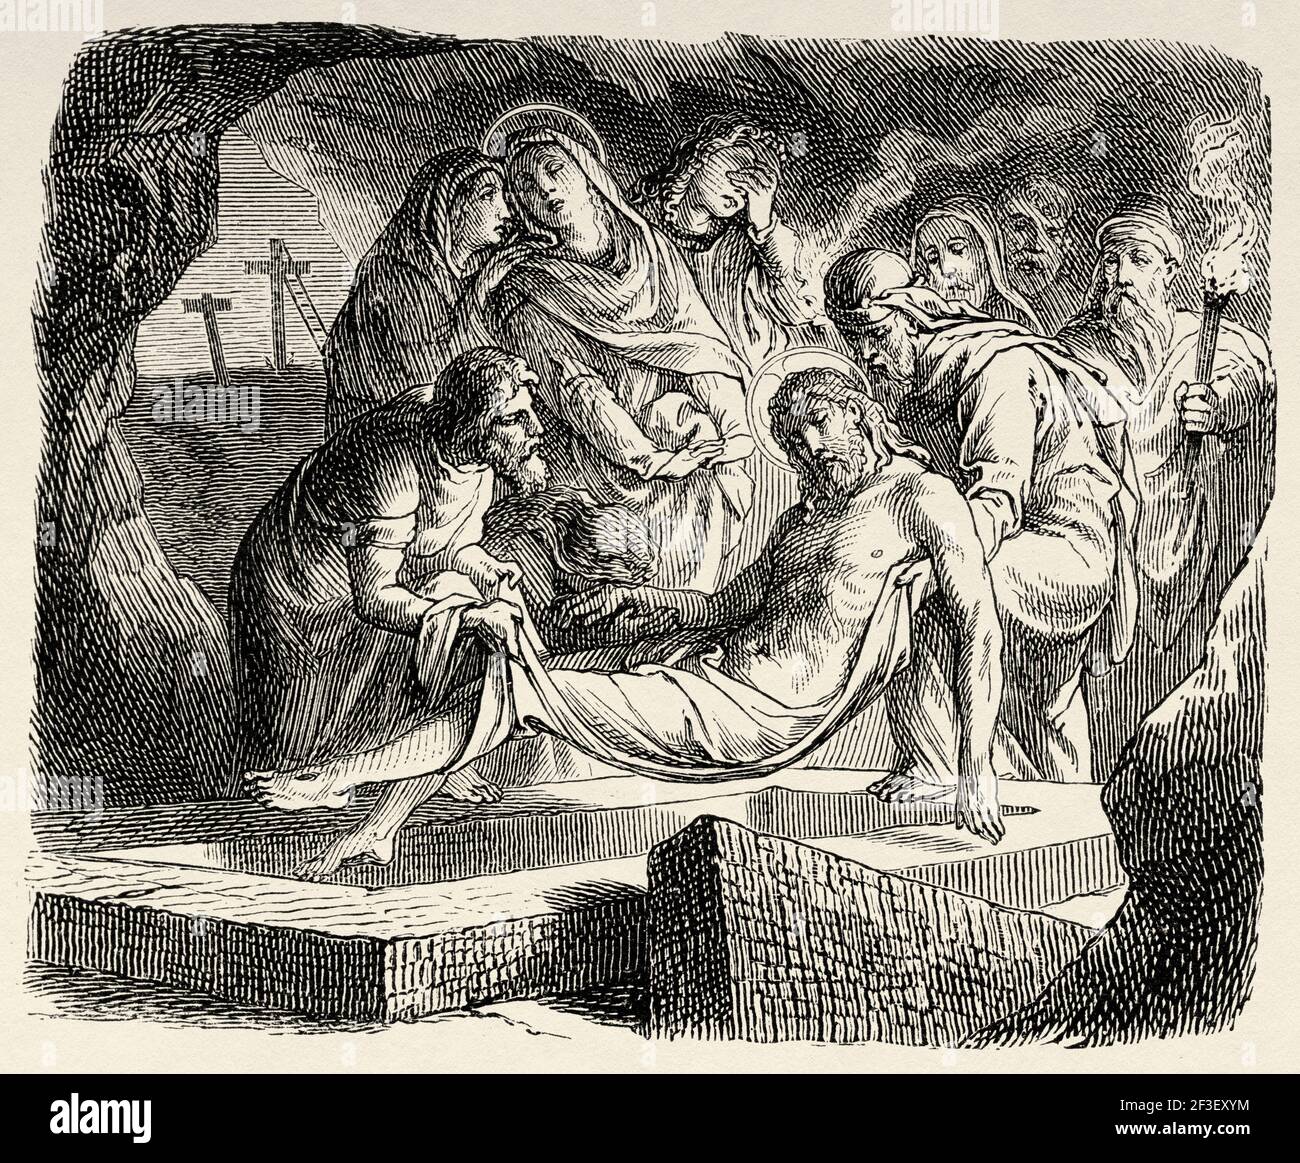 Jesus Buried. The dead Jesus. Joseph of Arimathea is placing his body in a tomb, Luke 23. New Testament, Old 19th century engraved illustration from History of the Bible 1883 Stock Photo